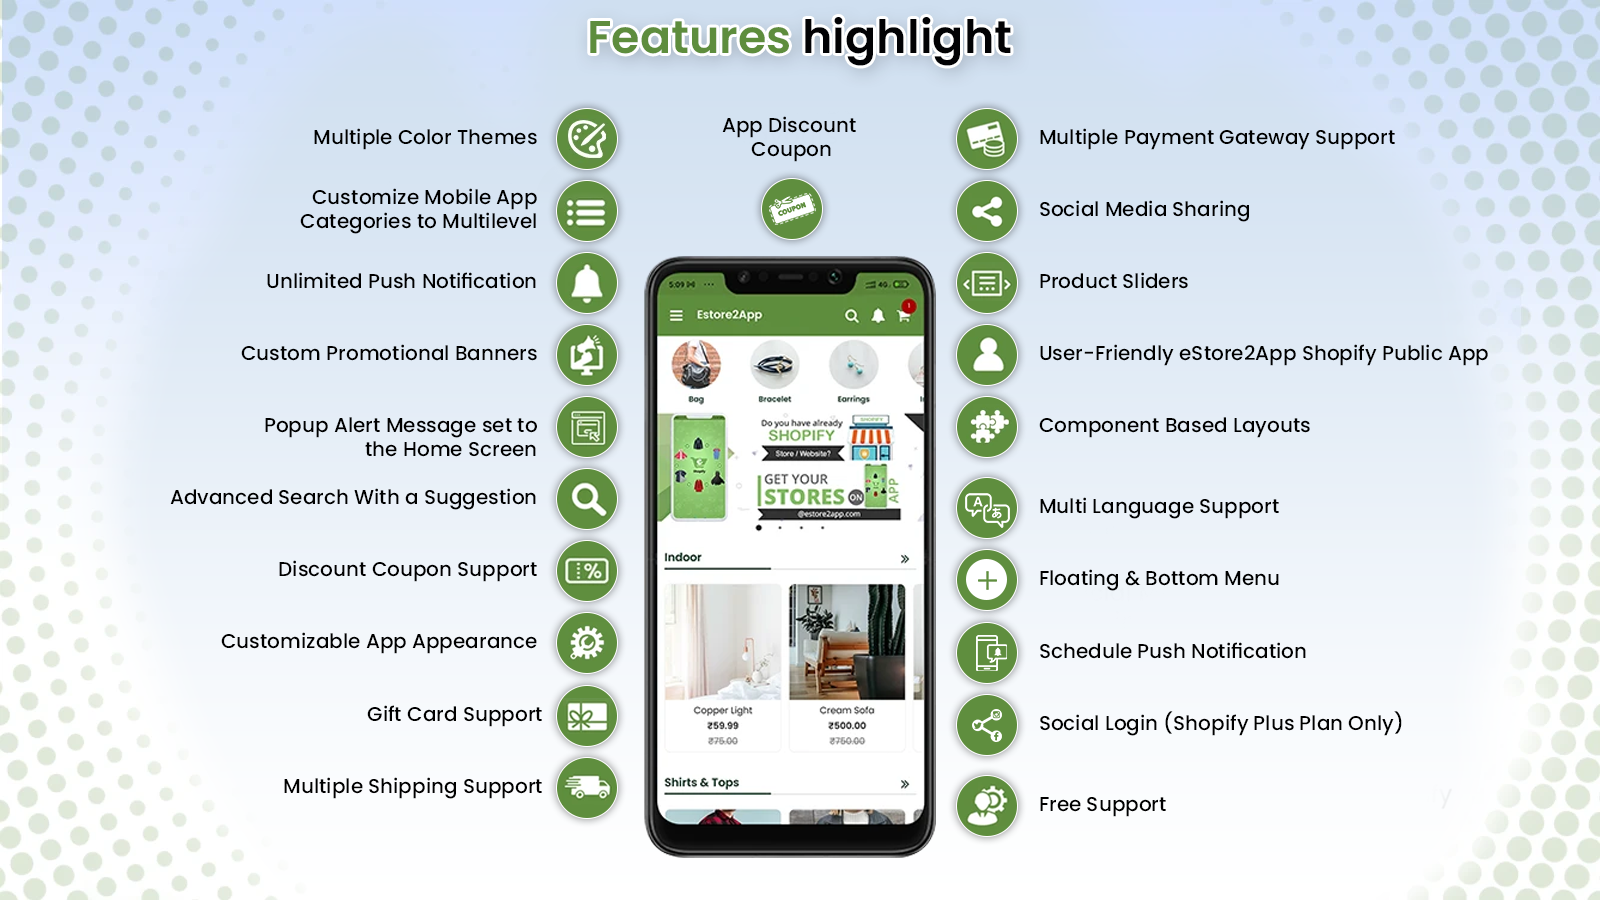 estore2app shopify features highlights